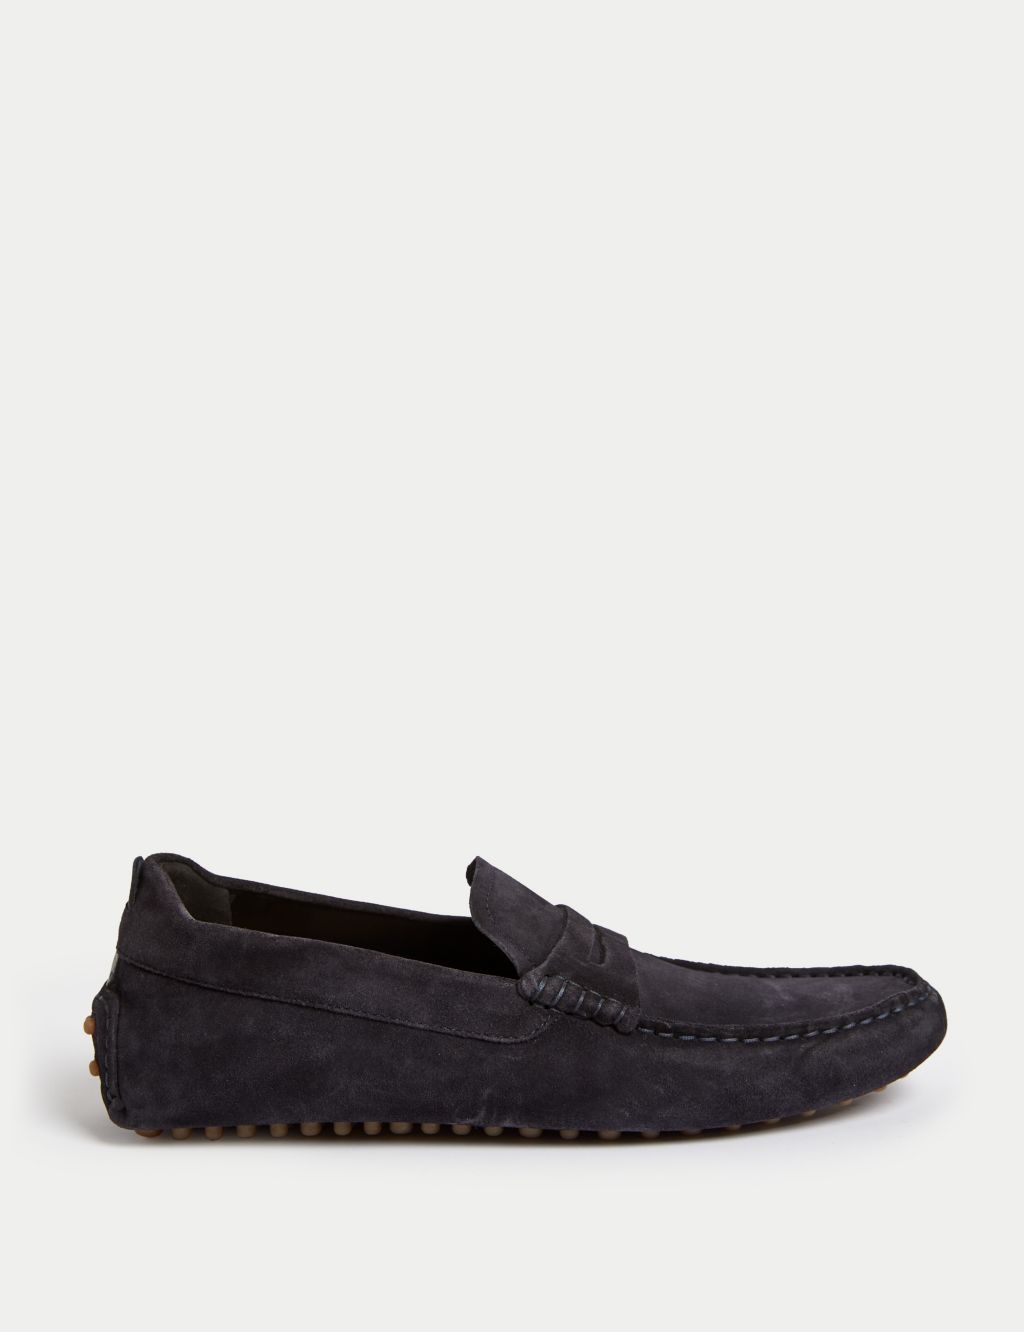 Men’s Smart Loafers Available at M&S